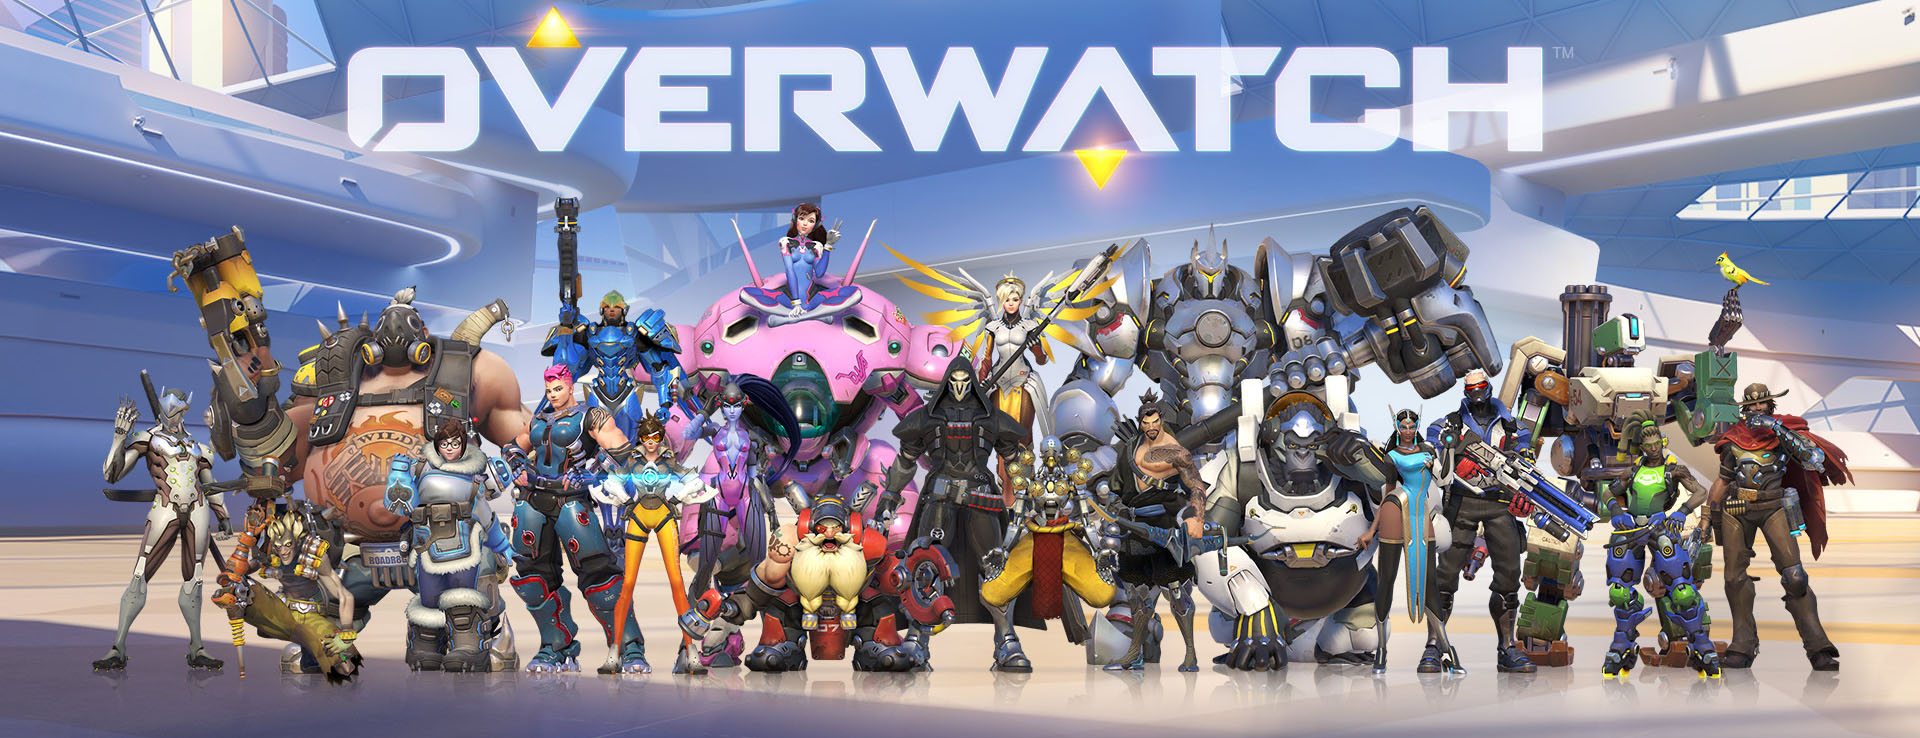 OVERWATCH: Stylish, Action-Packed, and Insanely Fun 17